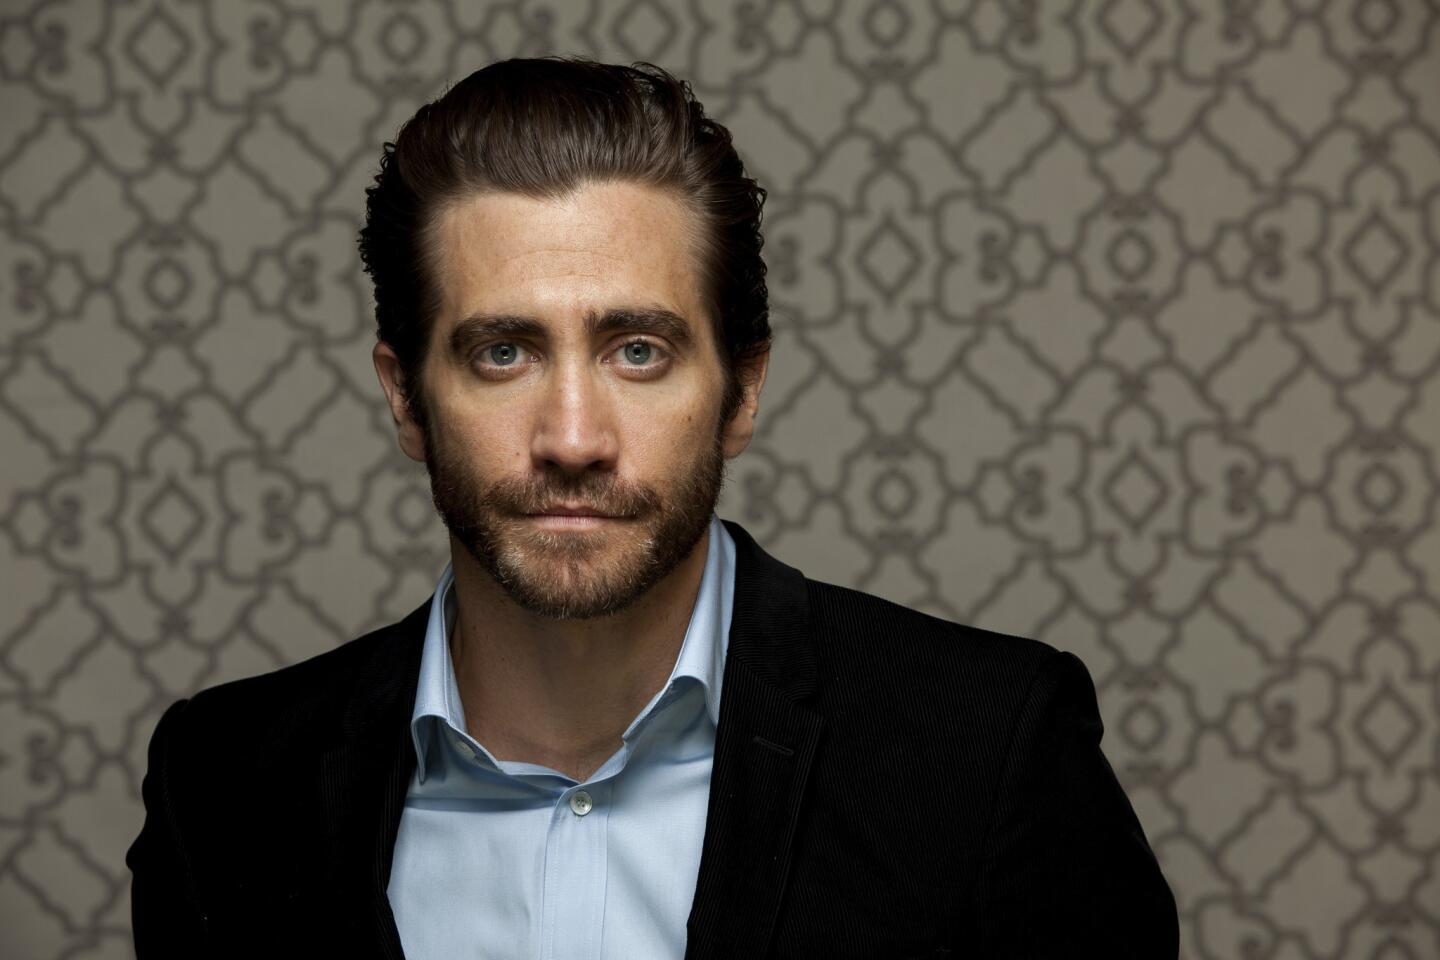 Jake Gyllenhaal was born into Hollywood royalty. Jamie Lee Curtis is his godmother, Paul Newman is his godfather, his father is a director and his mother a producer-screenwriter. When he was 11, Gyllenhaal made his big-screen debut in "City Slickers." Here is a look at his career since then.